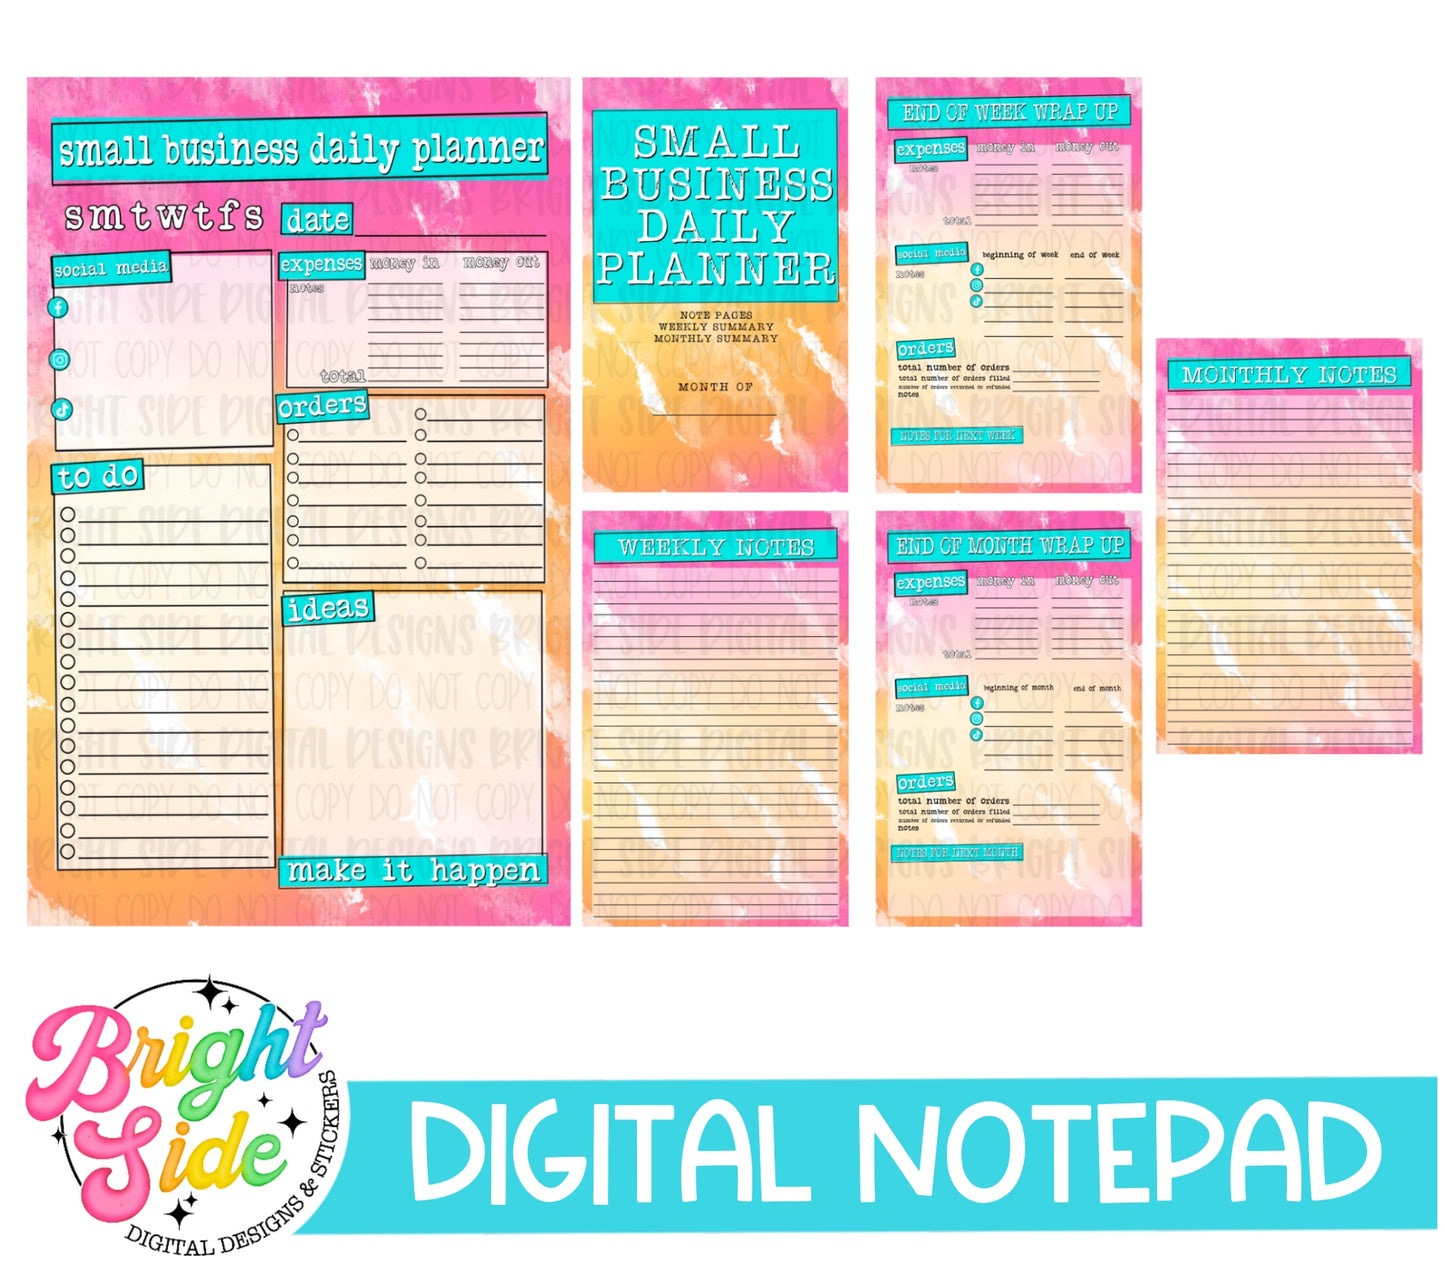 Small Business Daily Planner Digital Notepad